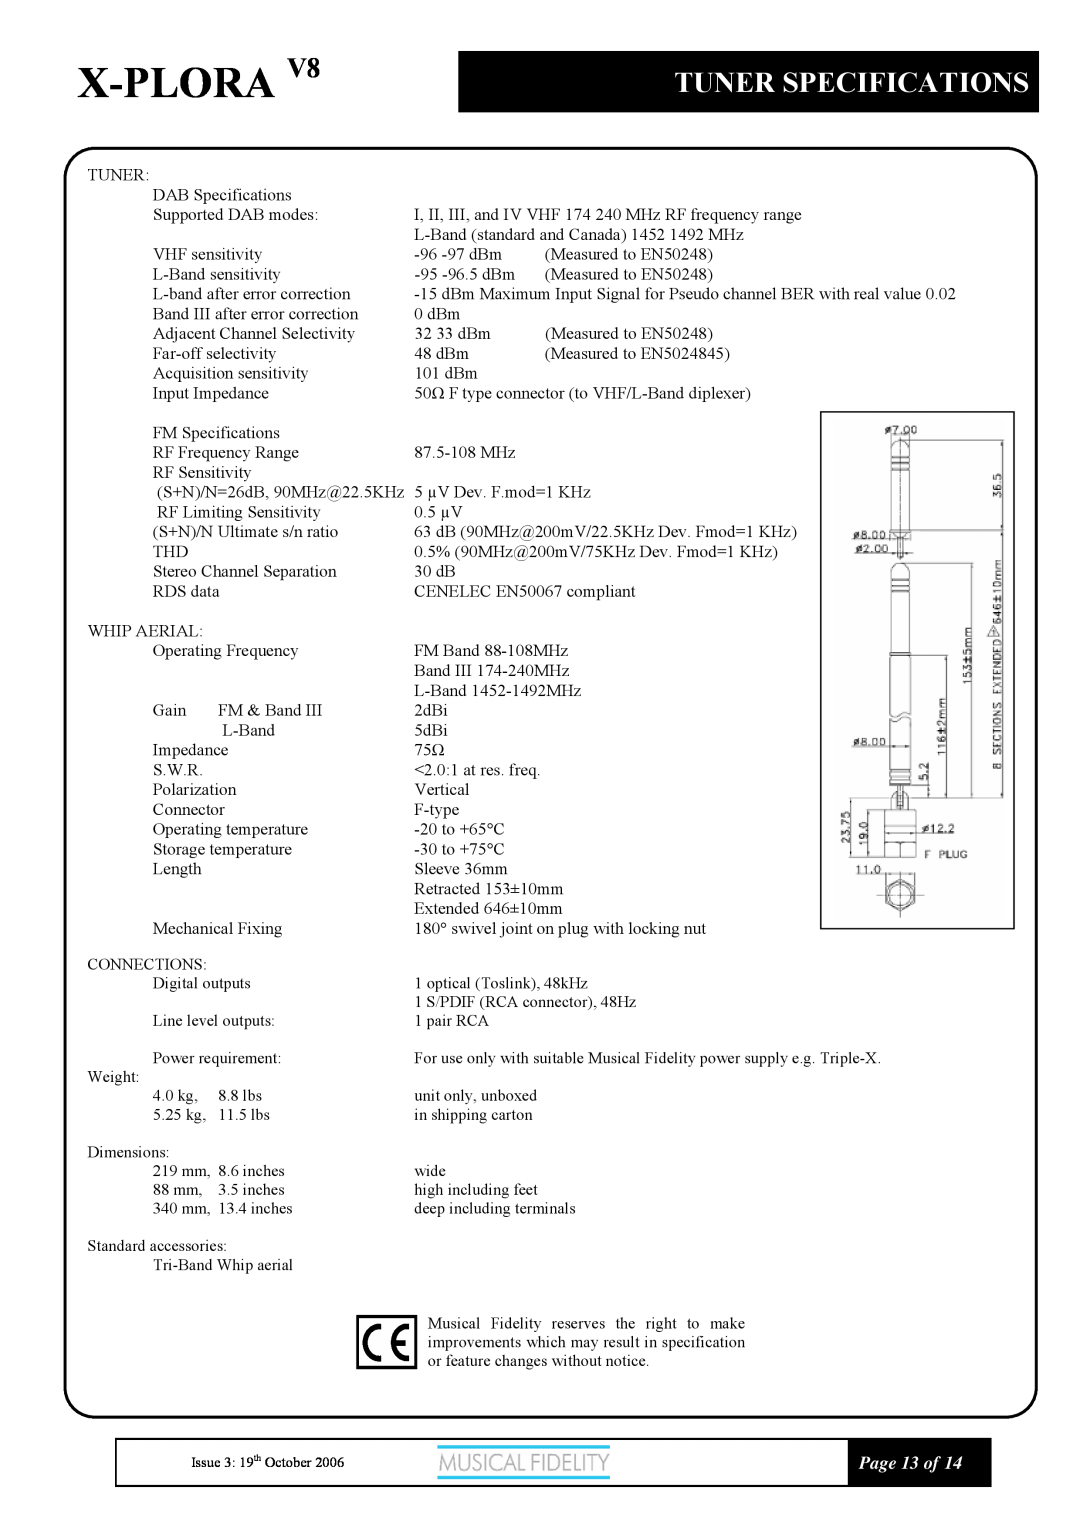 Musical Fidelity X-V8 manual Tuner Specifications, X-Plora, Page 13 of 